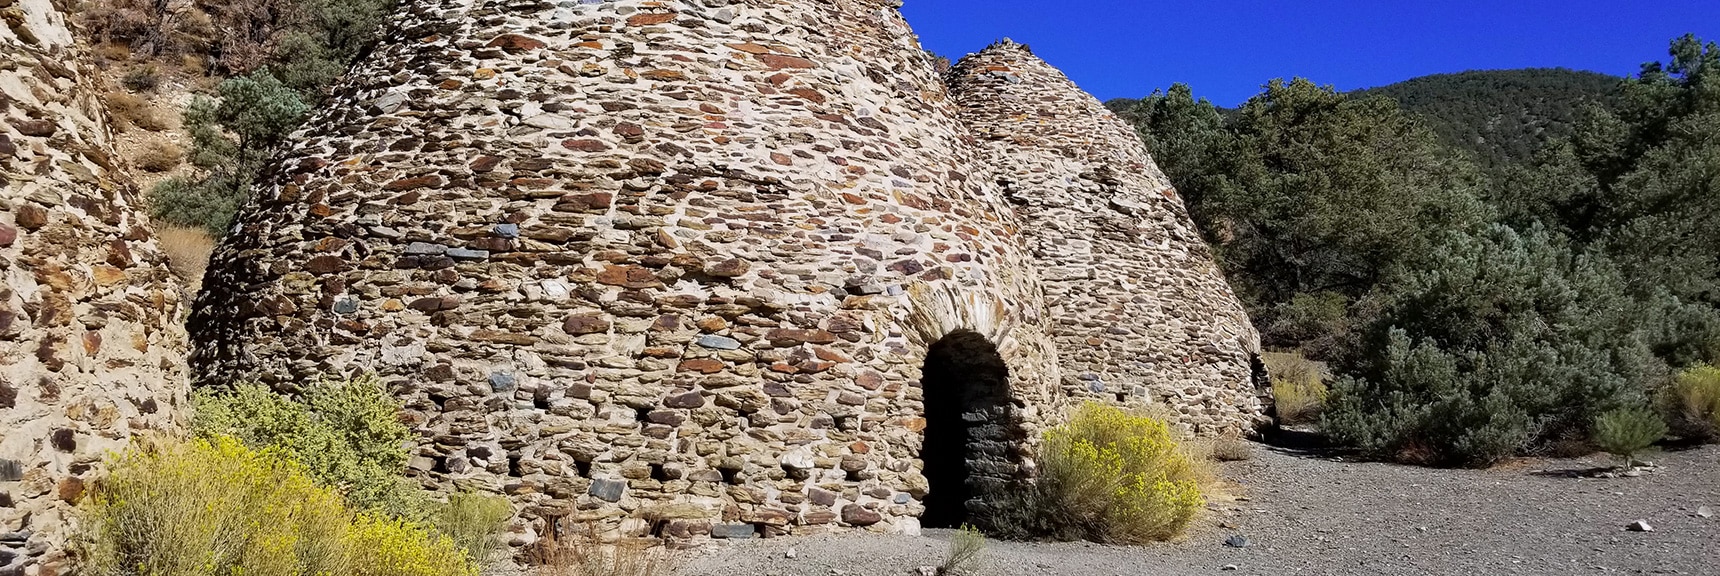 The Outside Entrance to a Charcoal Kiln | Charcoal Kilns | Death Valley, California